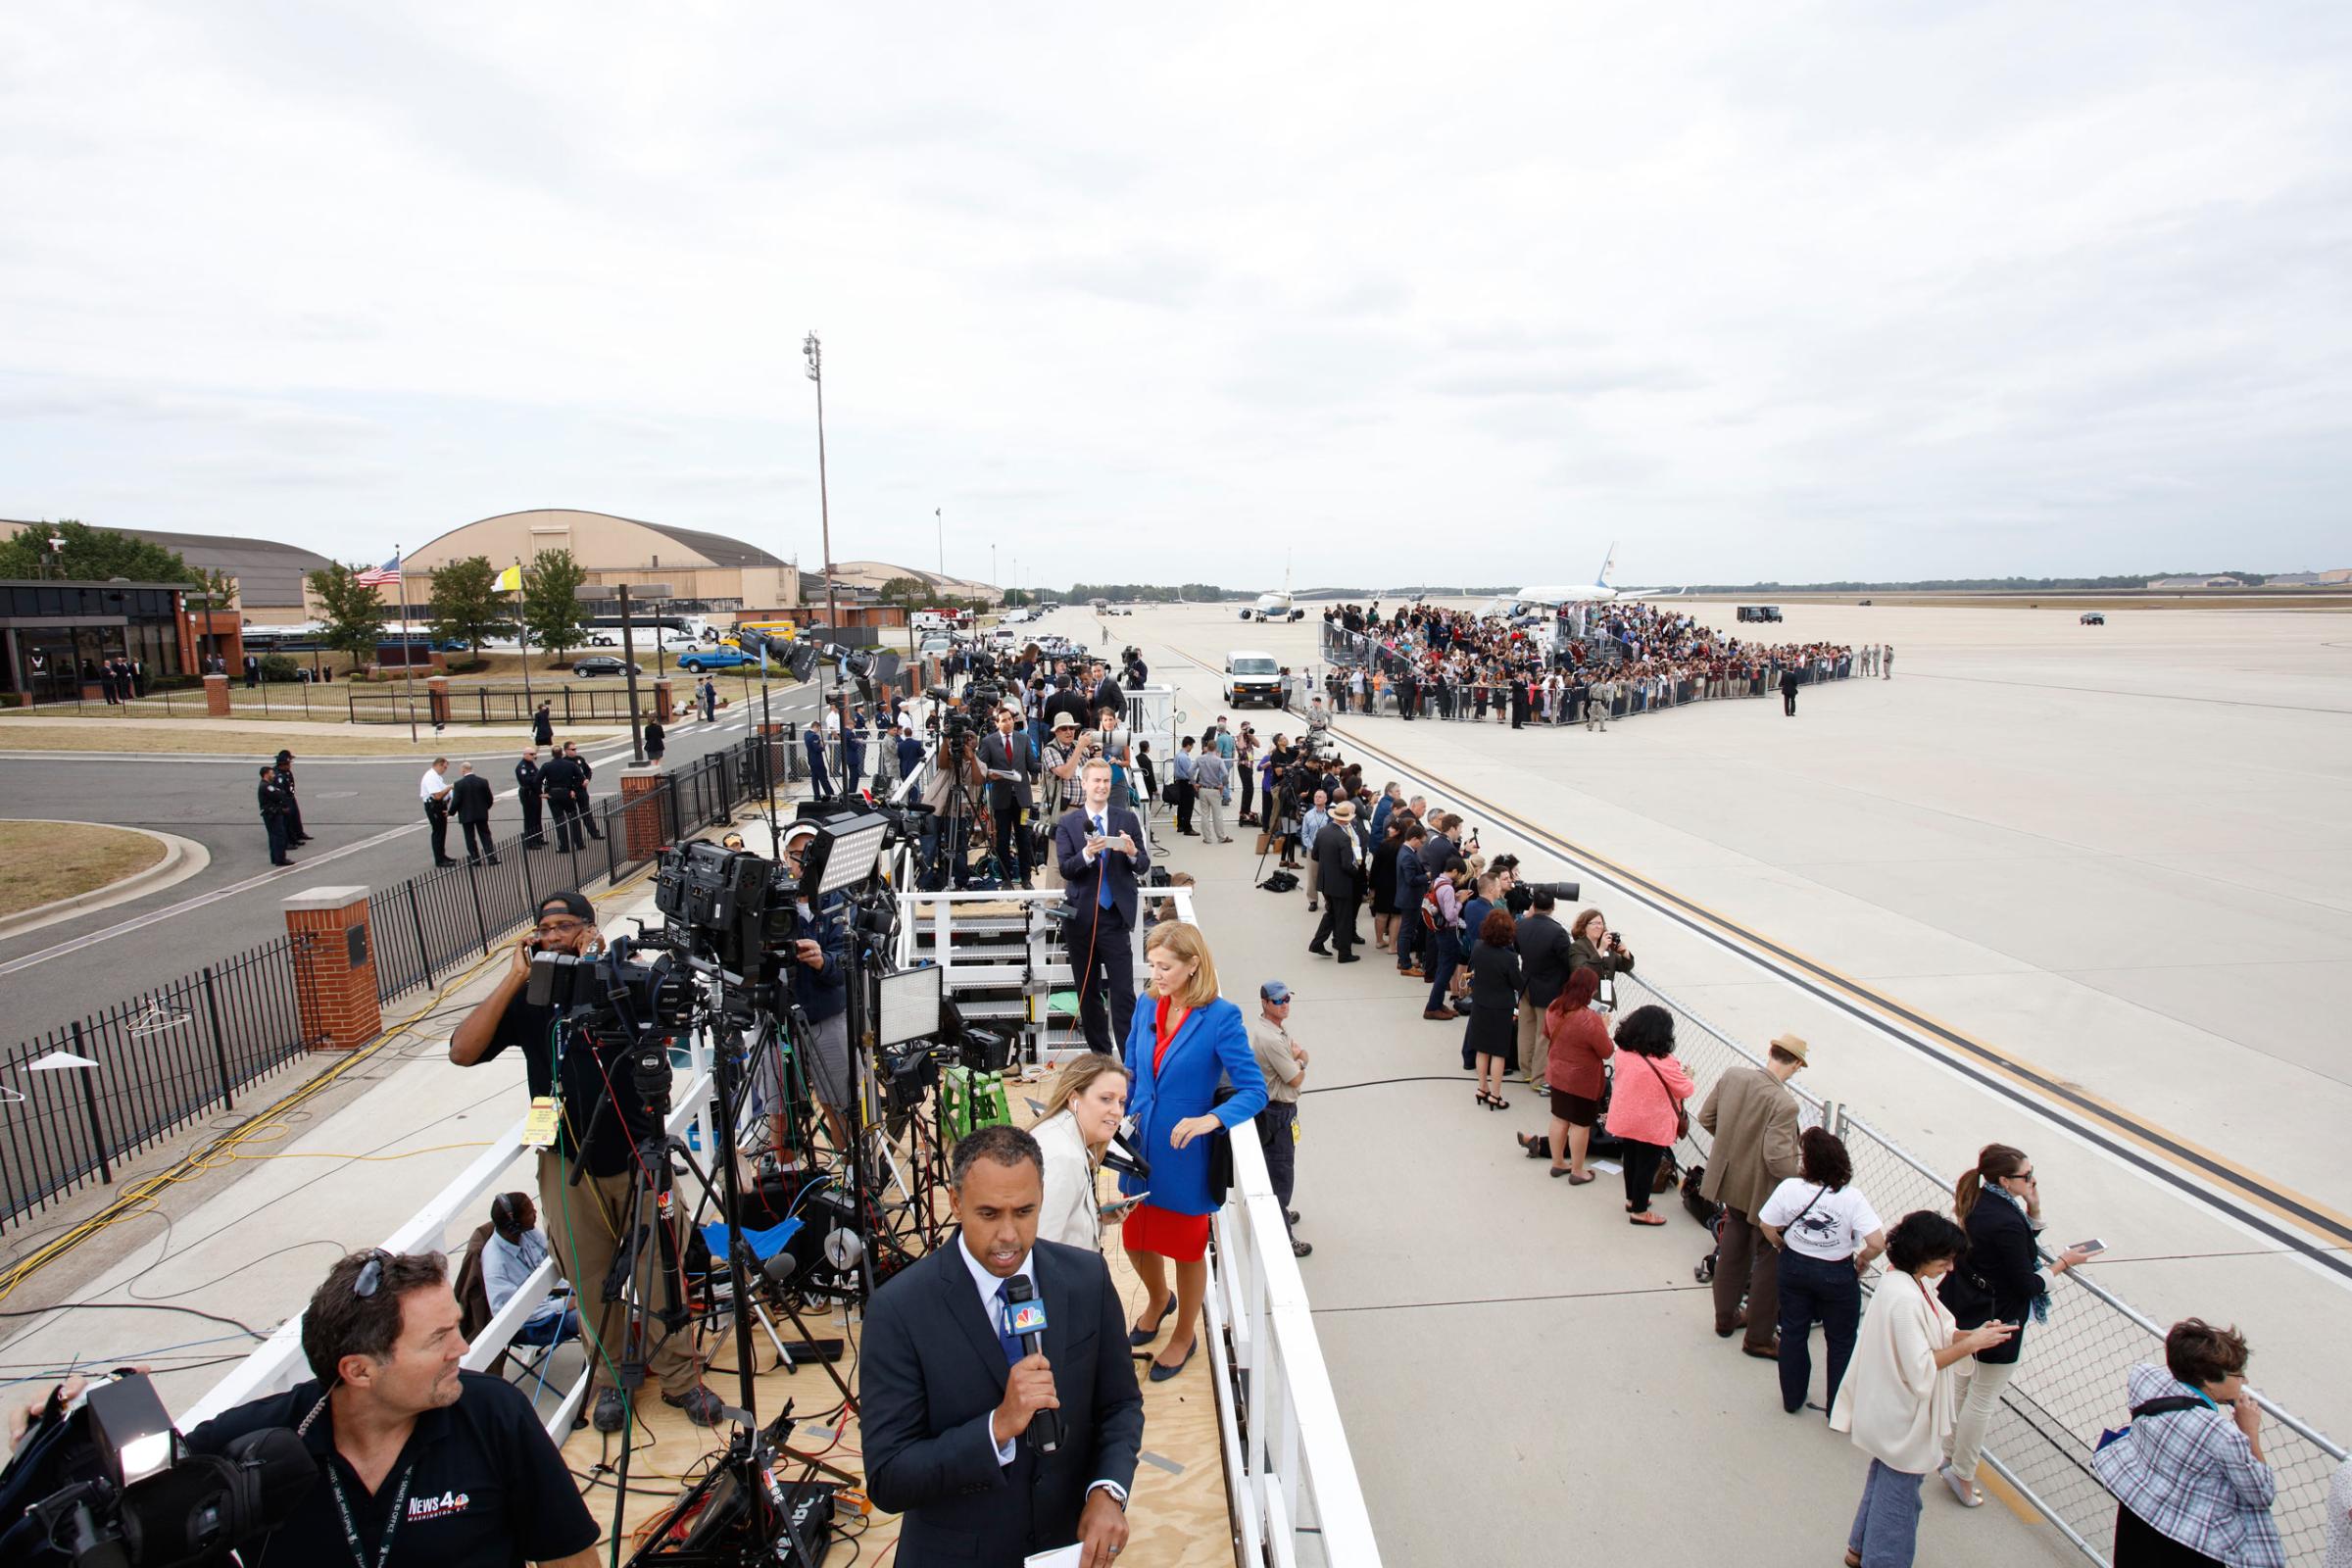 Members of the media await the arrival of Pope Francis at Andrews Air Force Base, Md., Tuesday, Sept. 22, 2015.Washington, D.C. Photograph by Tobias Hutzler for TIME